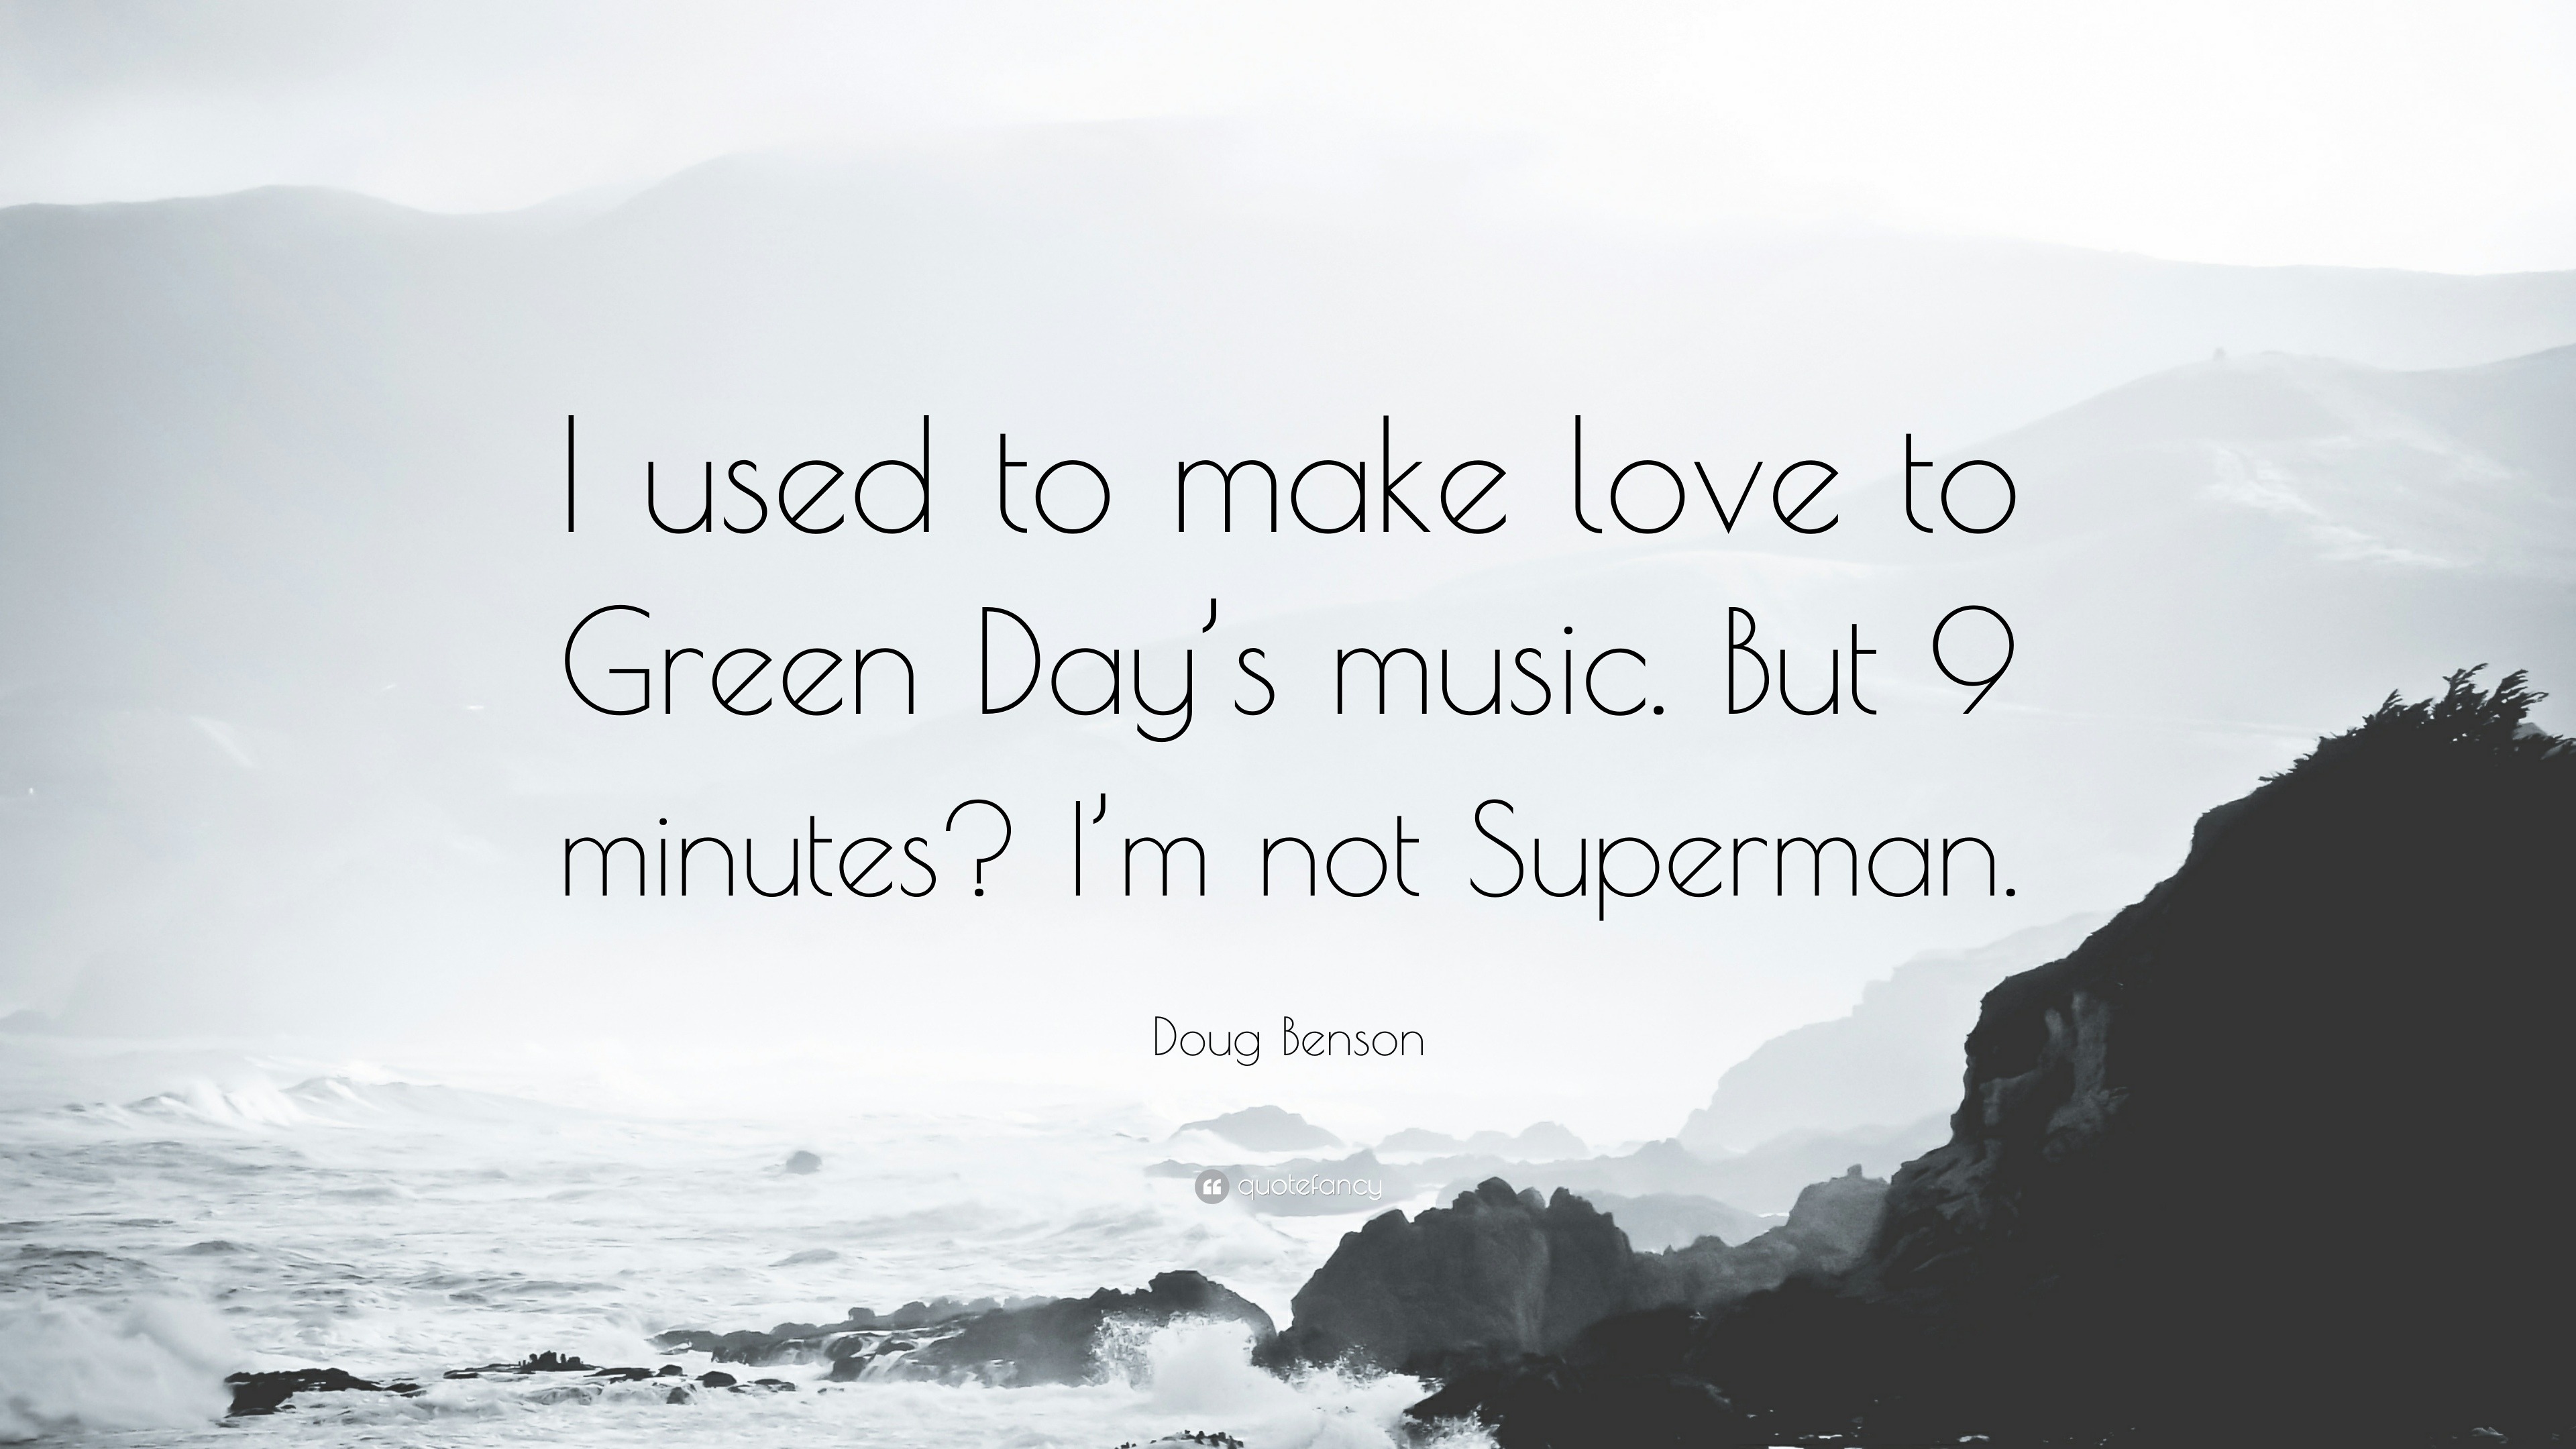 Doug Benson Quote “I used to make love to Green Day s music But